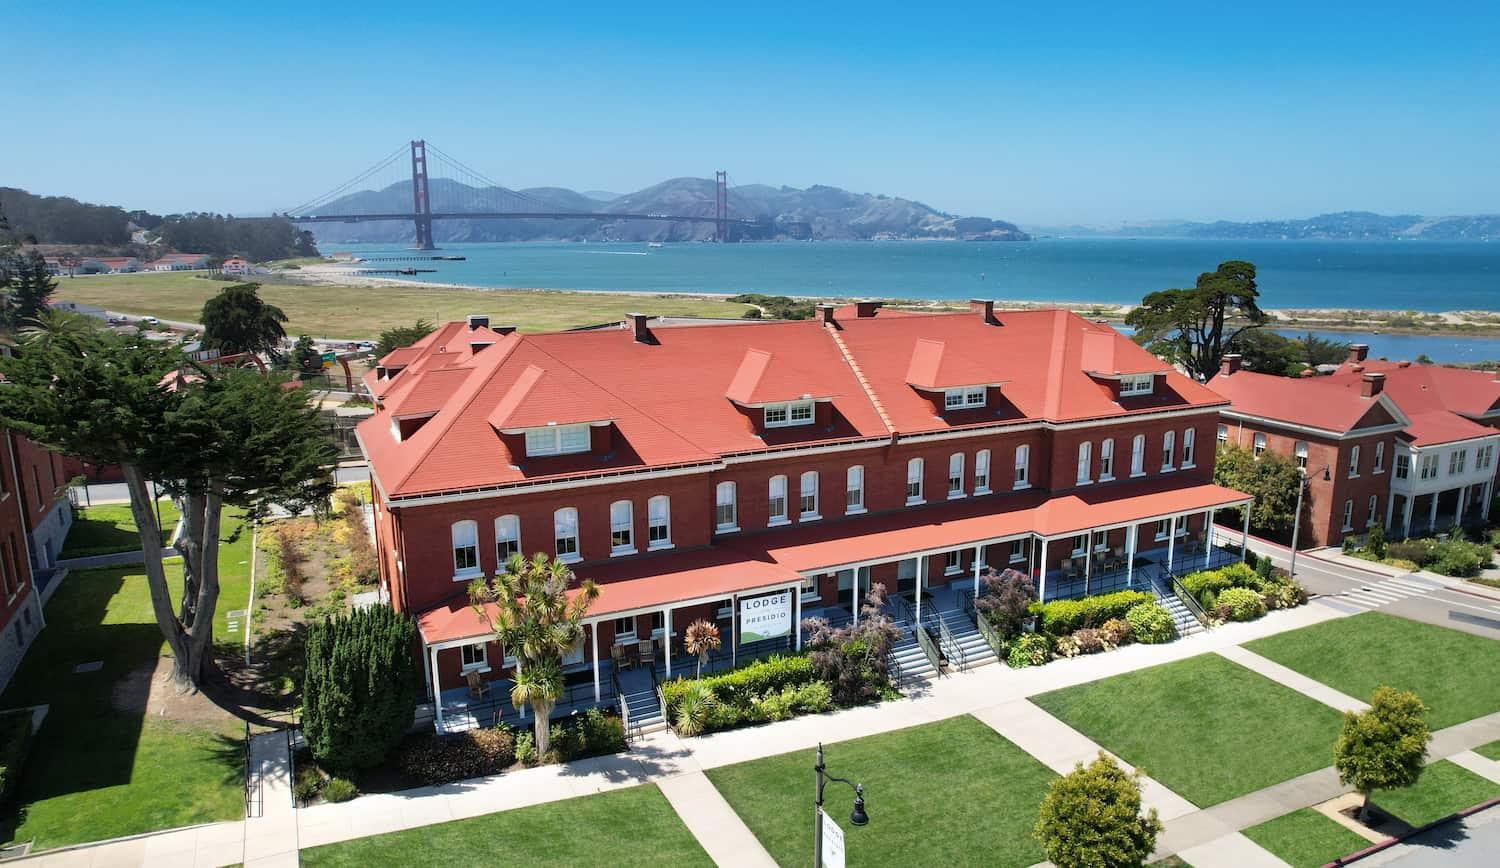 Aerial image of the Lodge at the Presidio with Golden Gate Bridge in the background.